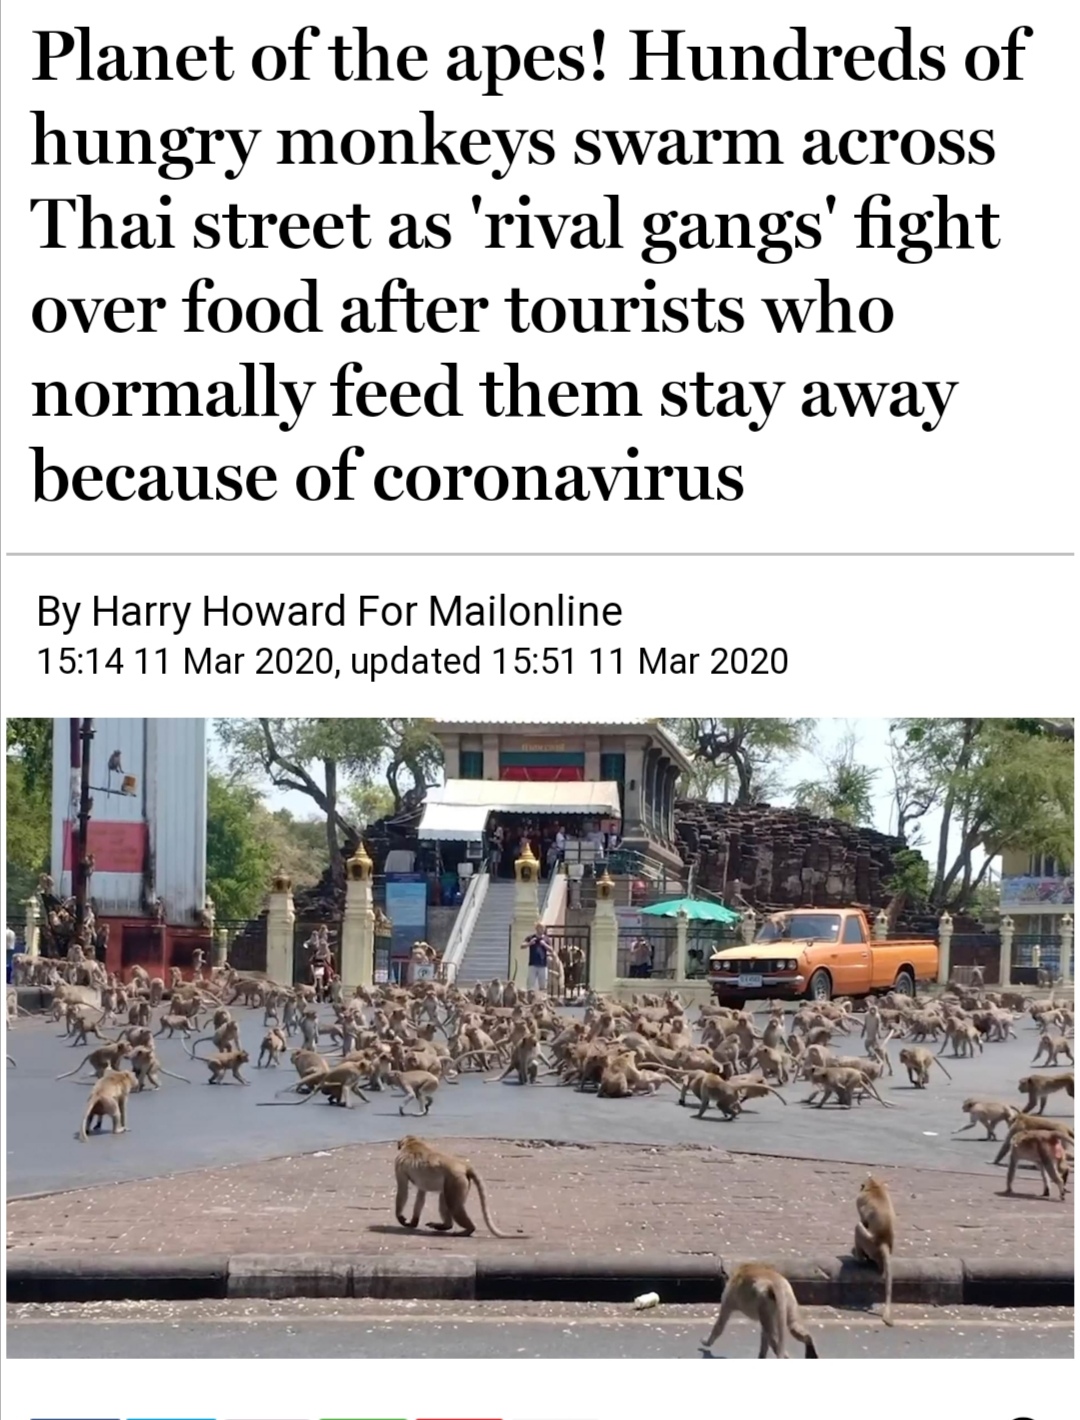 vehicle - Planet of the apes! Hundreds of hungry monkeys swarm across Thai street as 'rival gangs' fight over food after tourists who normally feed them stay away because of coronavirus By Harry Howard For Mailonline , updated